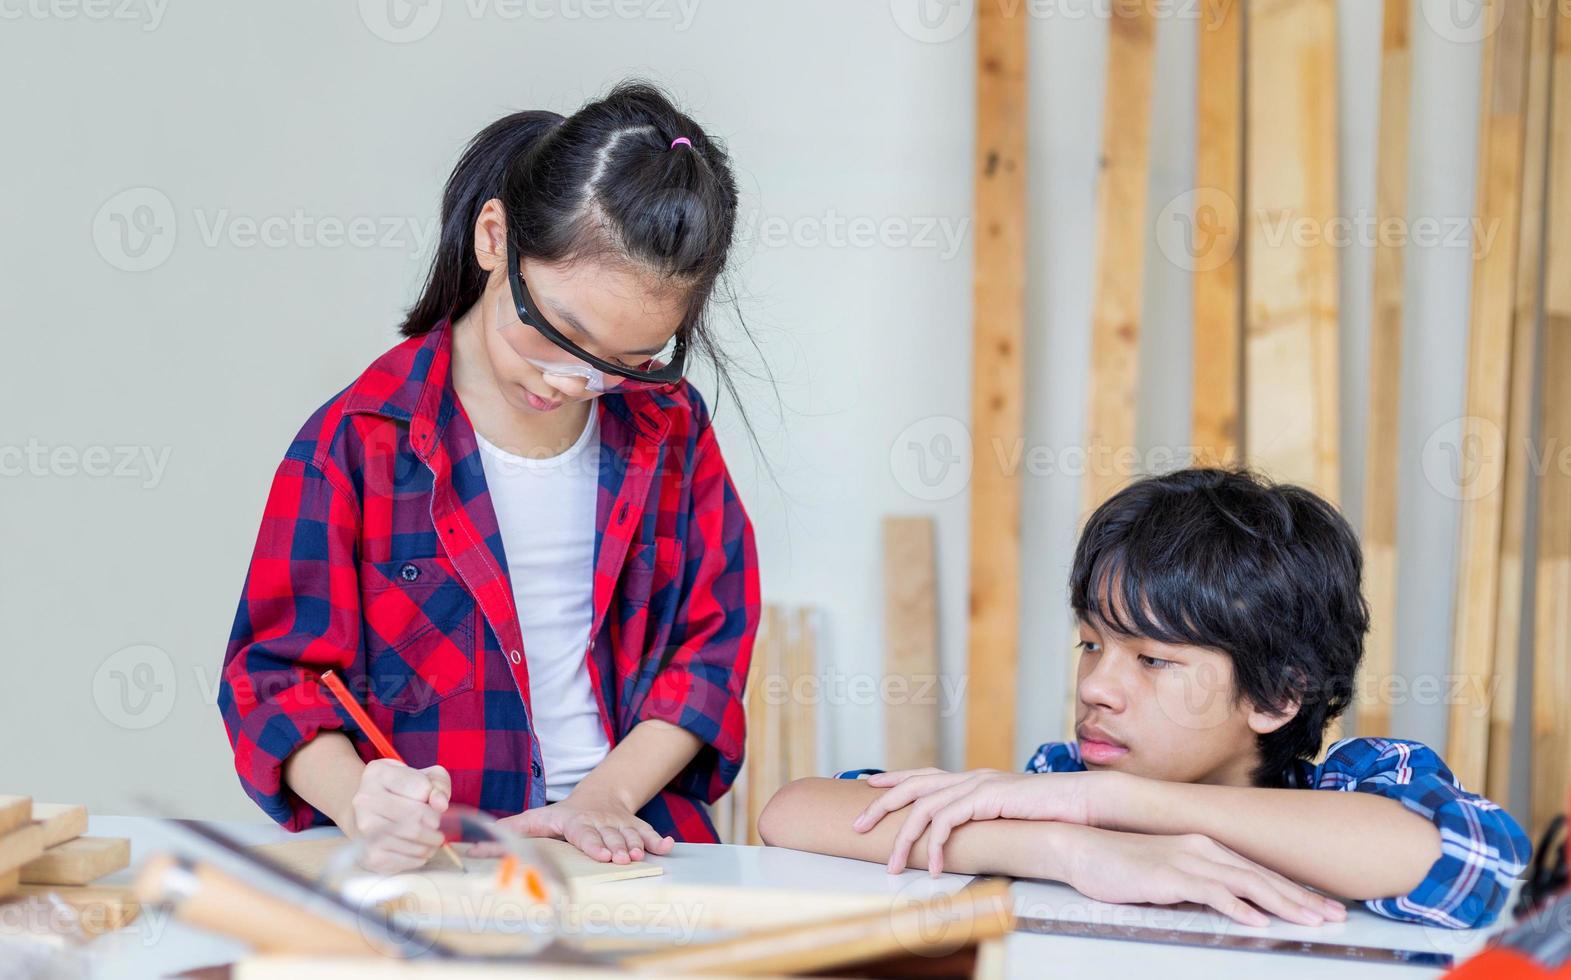 Children learning woodworking in the craftsman workshop, Teenager boy with his little sister building a workshop together in a carpentry workshop. photo